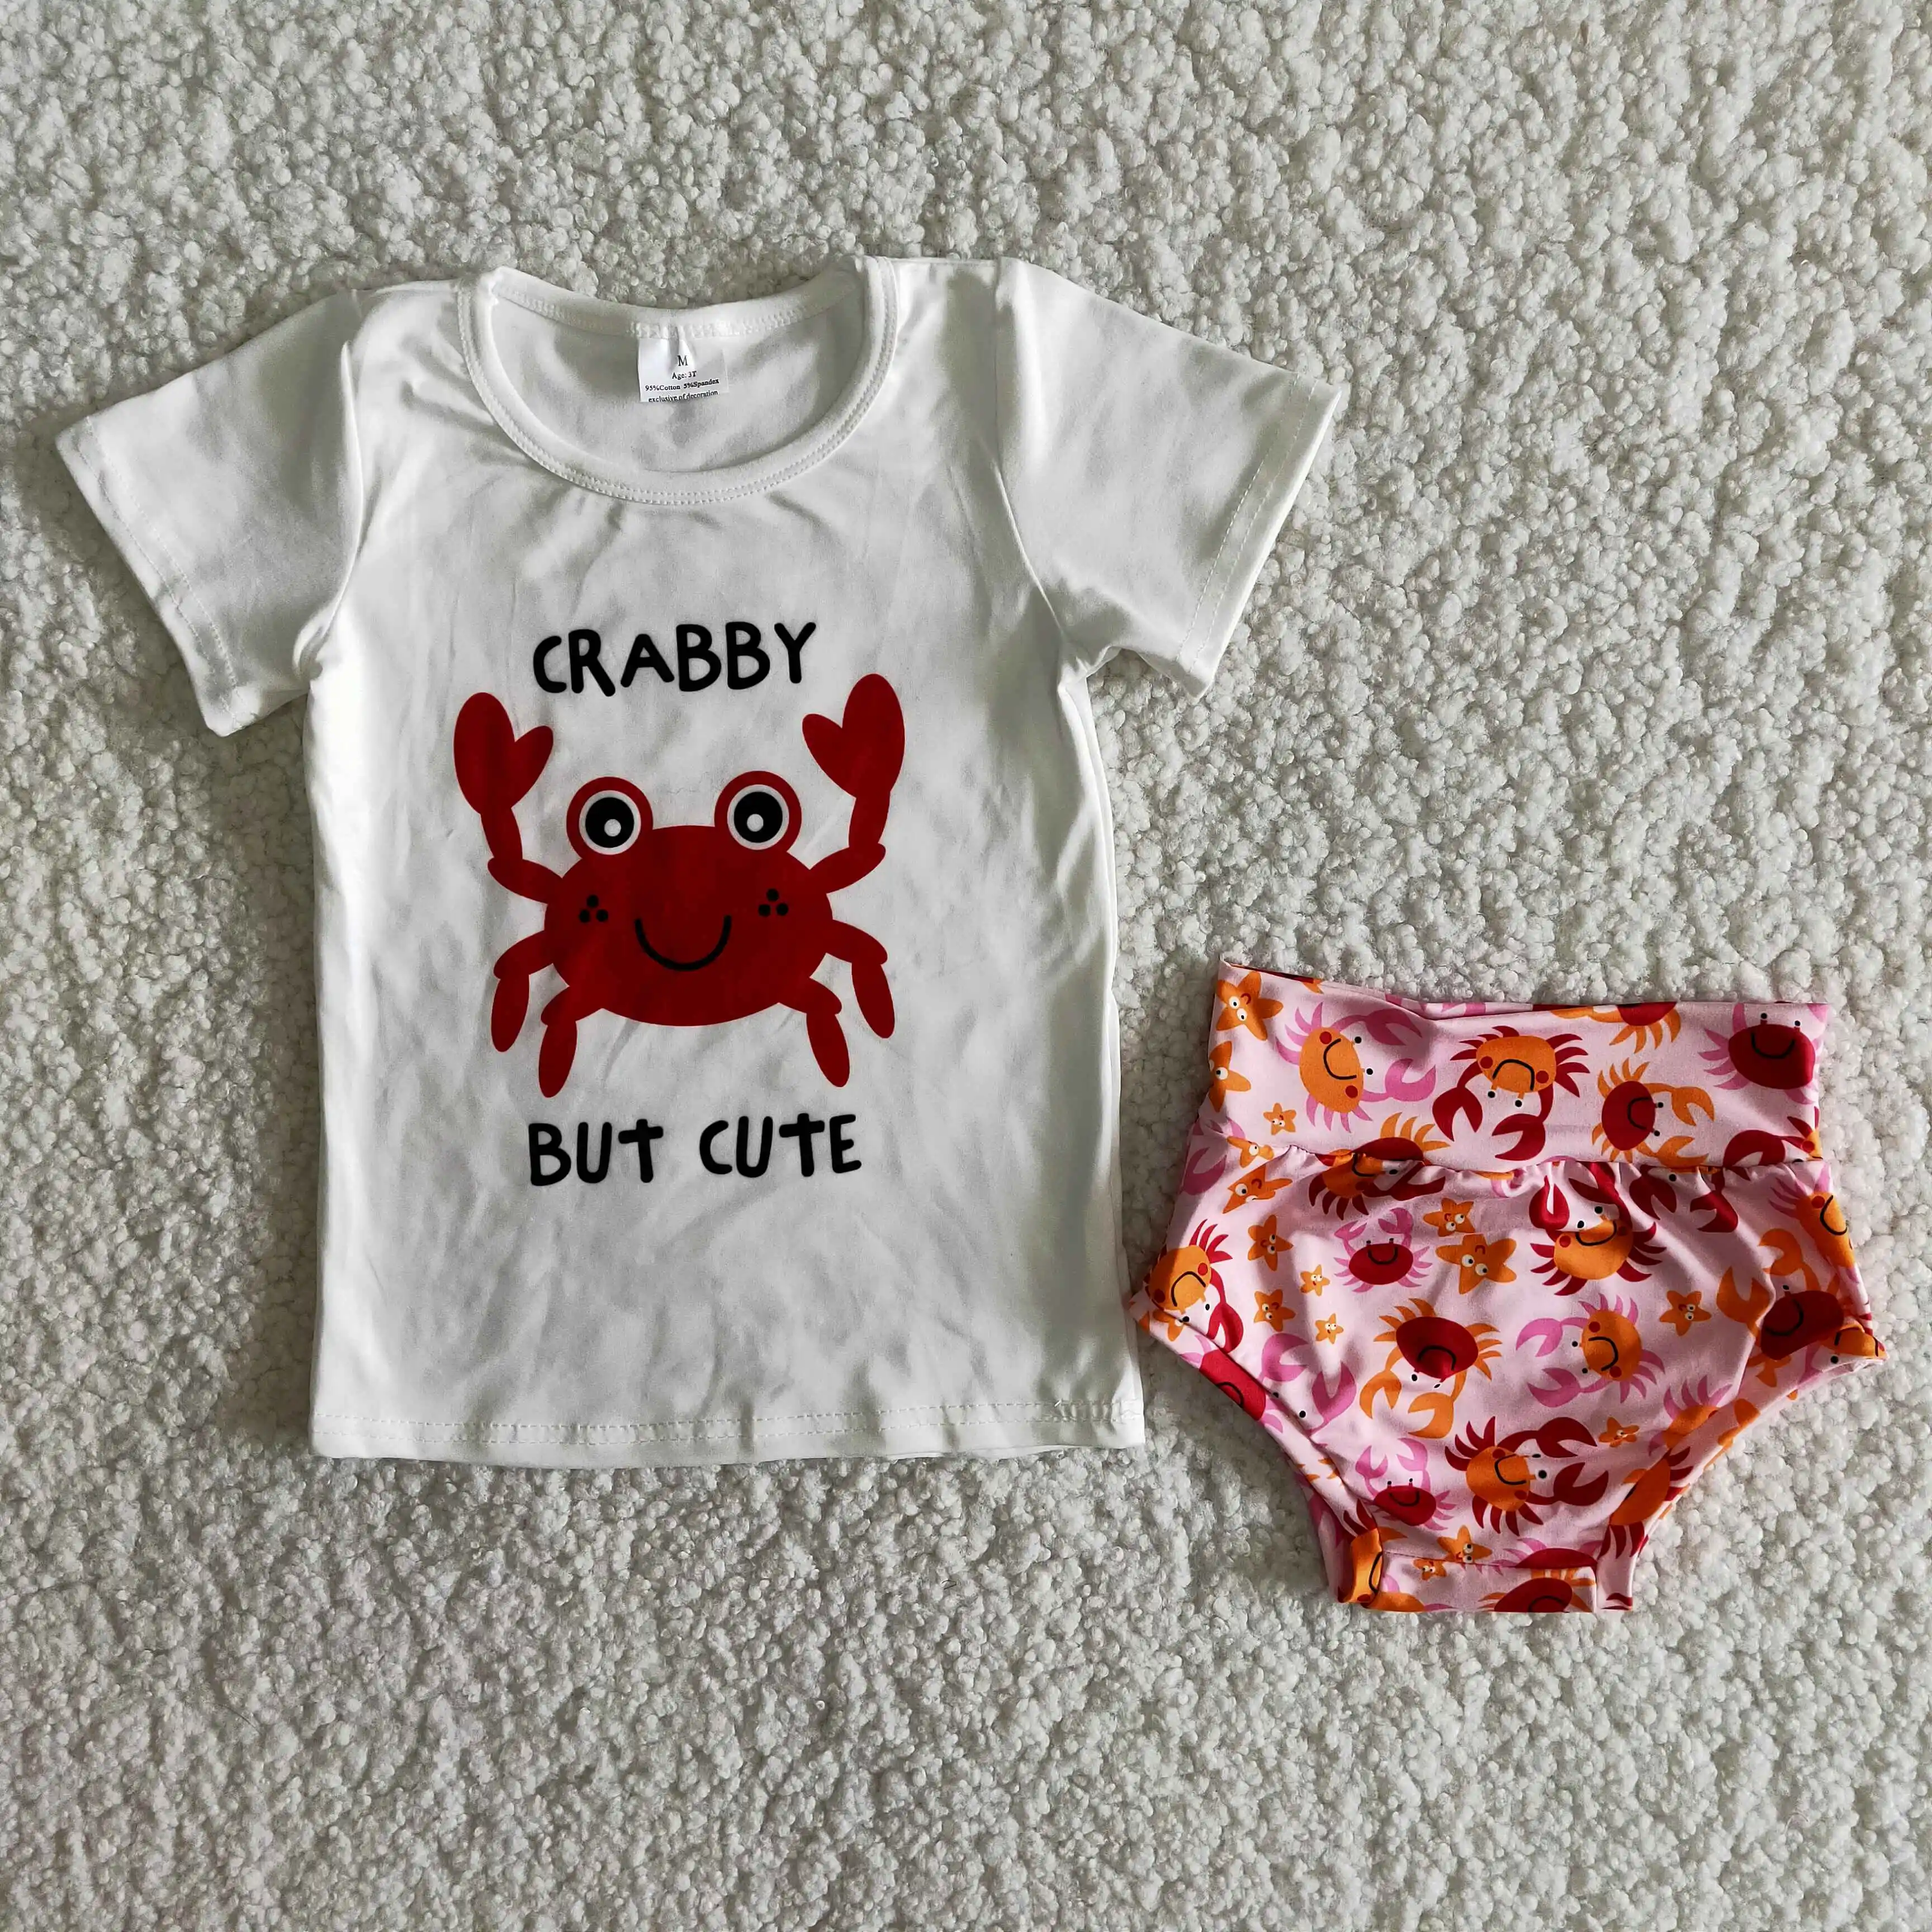 

Baby Girls Cute Carbby Outfits Short Sleeves T-shirt And Red Bloomer Children Clothing Bummies Sets Boutique Toddlers Clothes